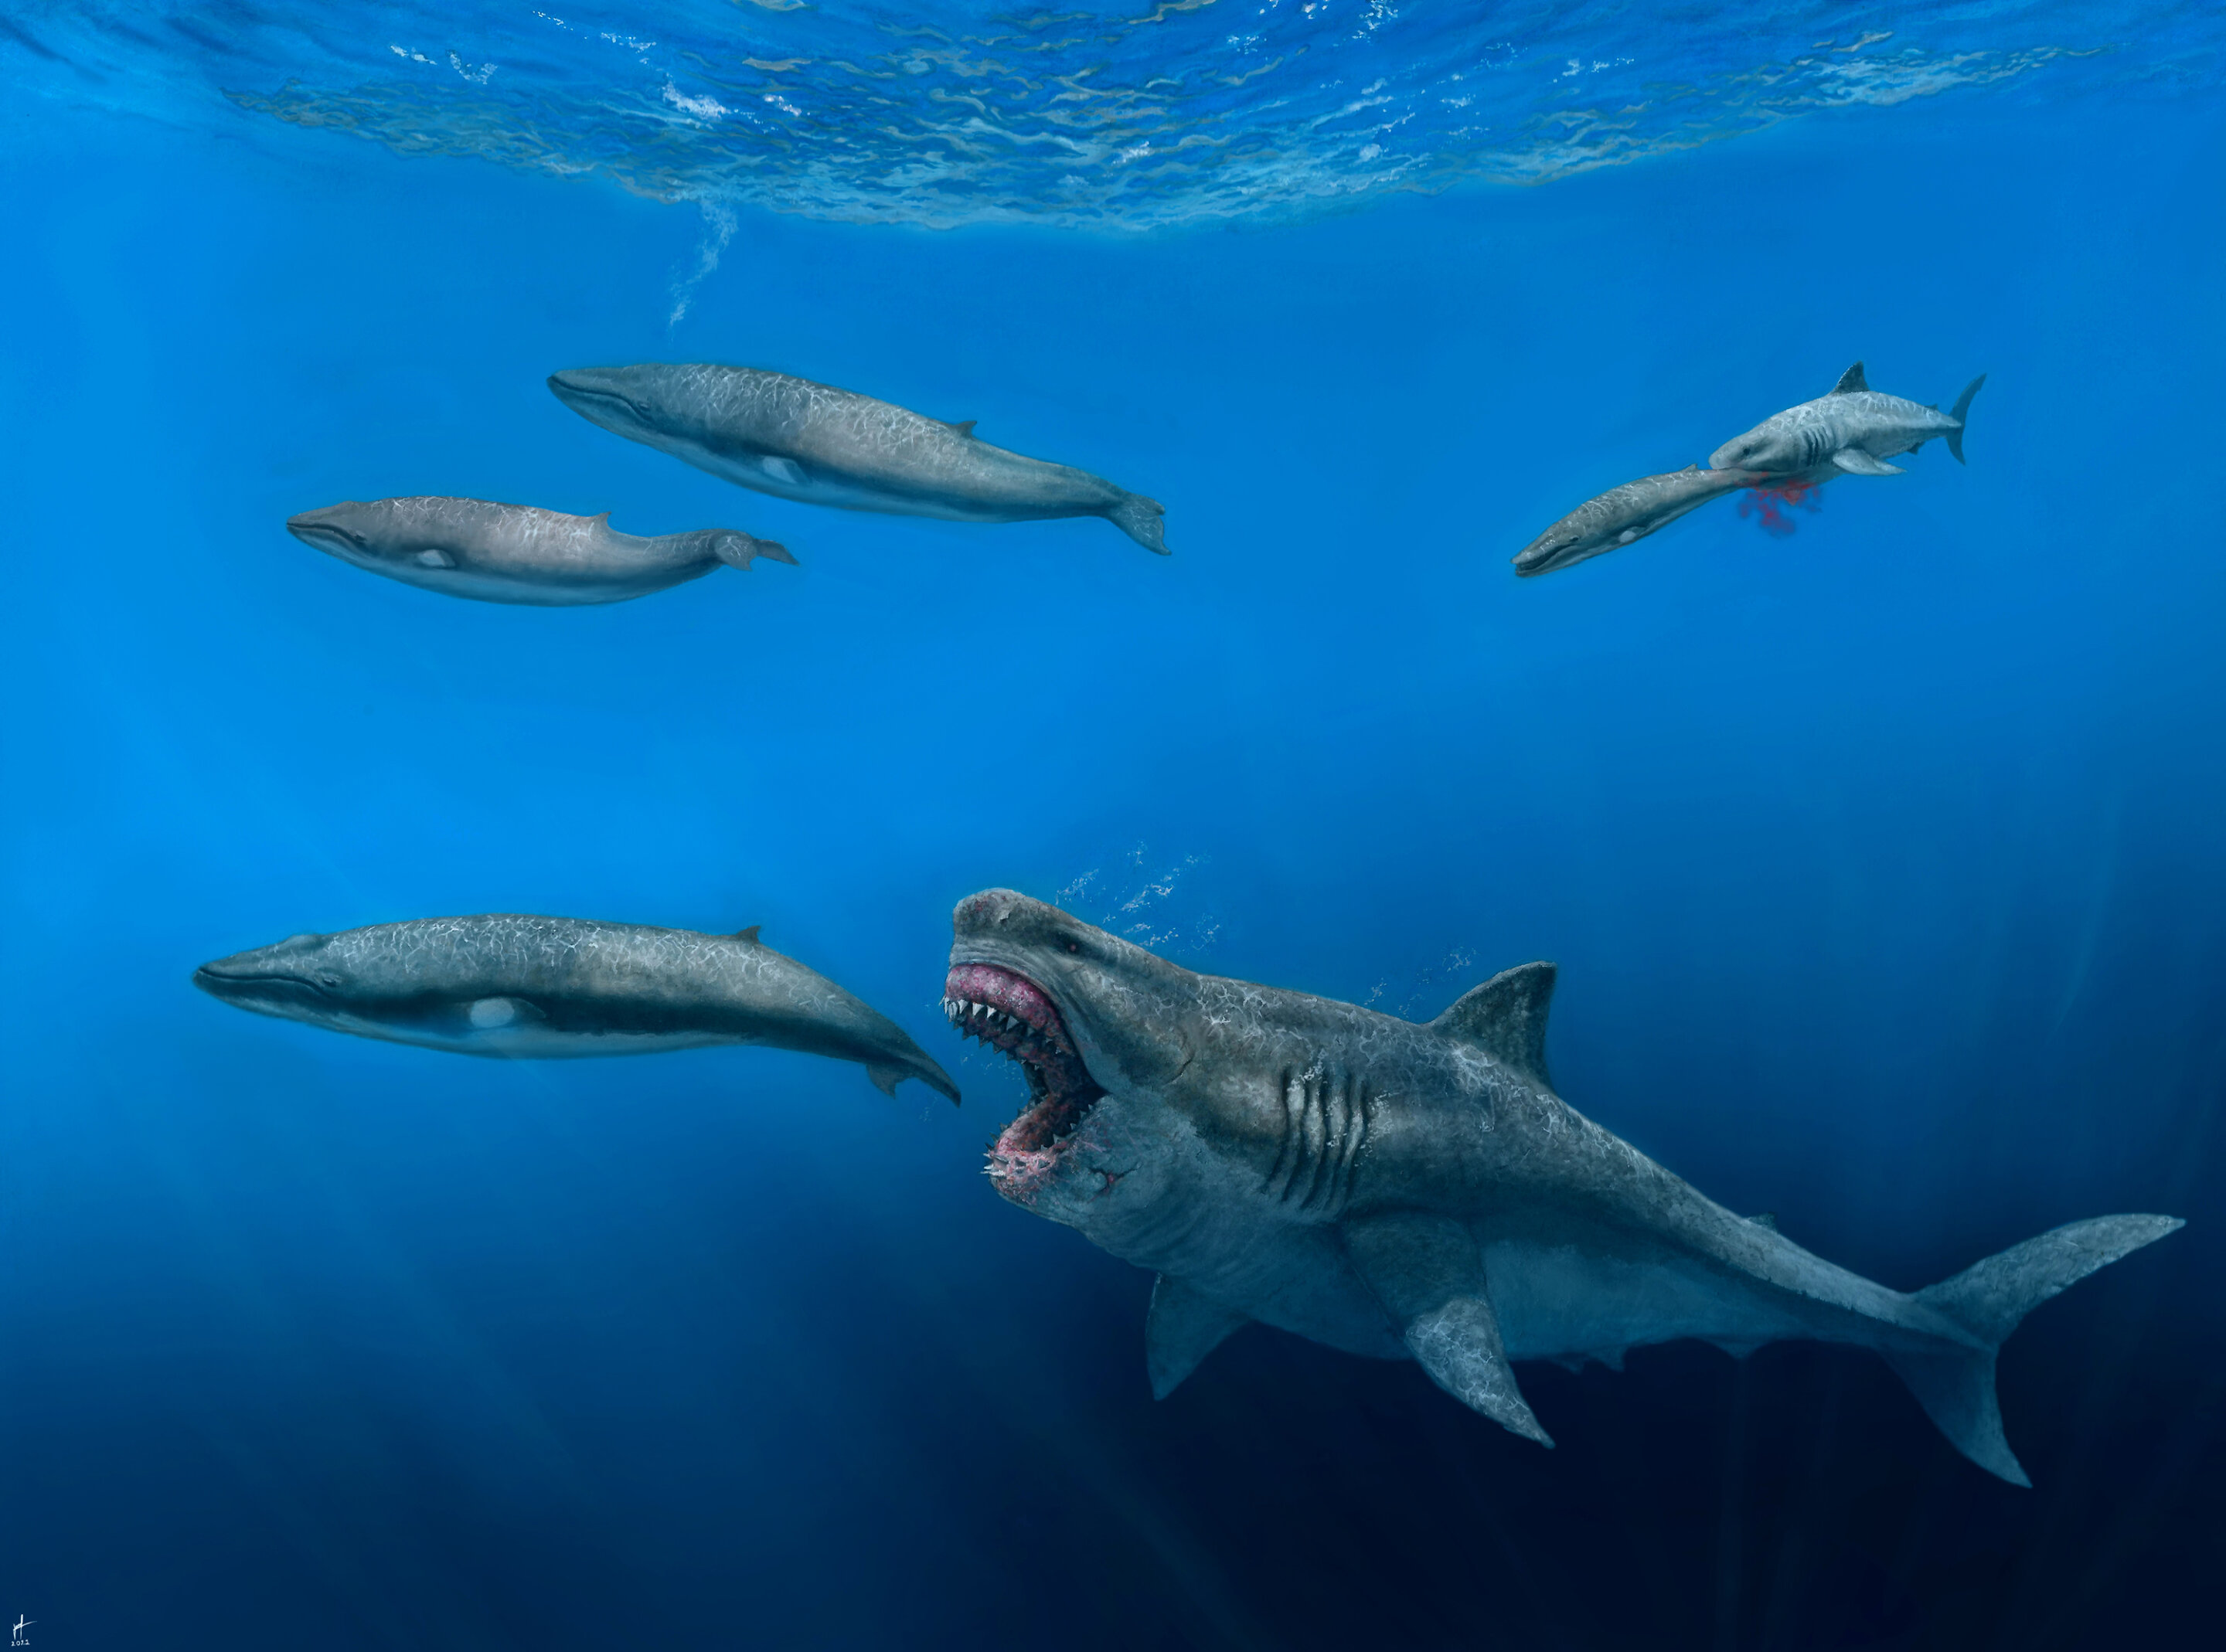 new-3d-model-shows-megalodon-could-eat-prey-the-size-of-entire-killer-whales